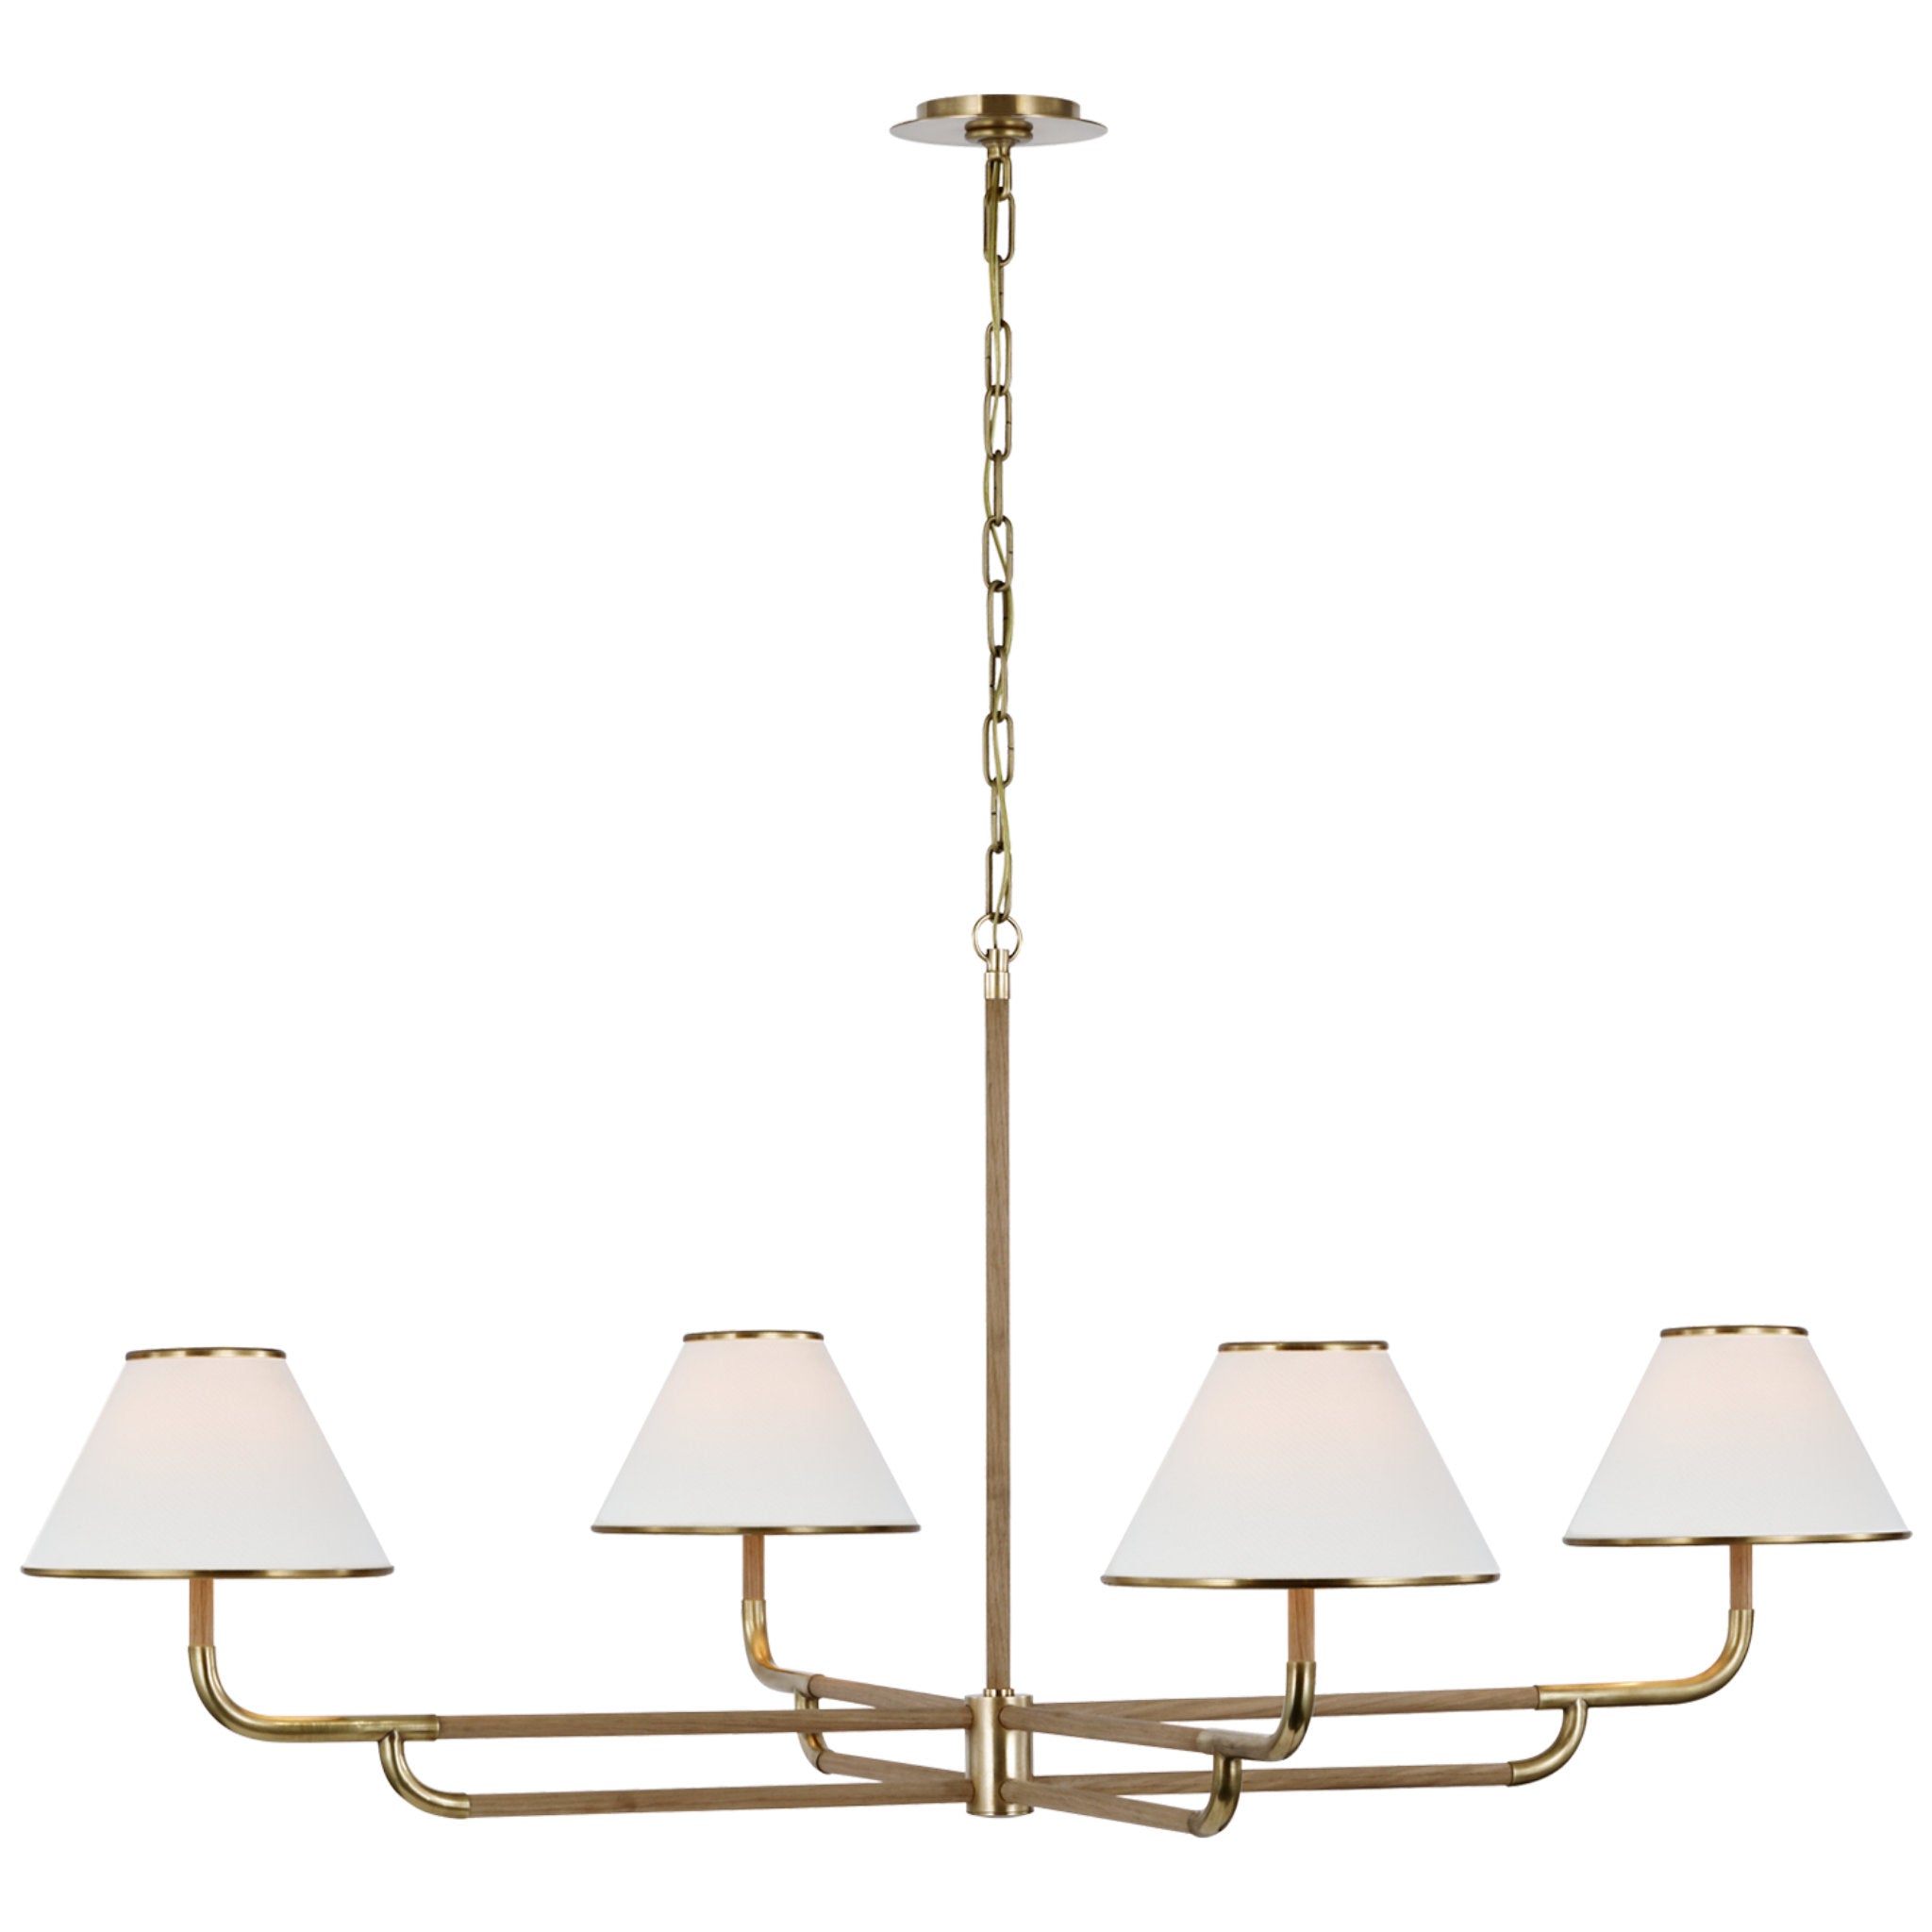 Marie Flanigan Rigby Grande Chandelier in Soft Brass and Natural Oak with Linen Shade